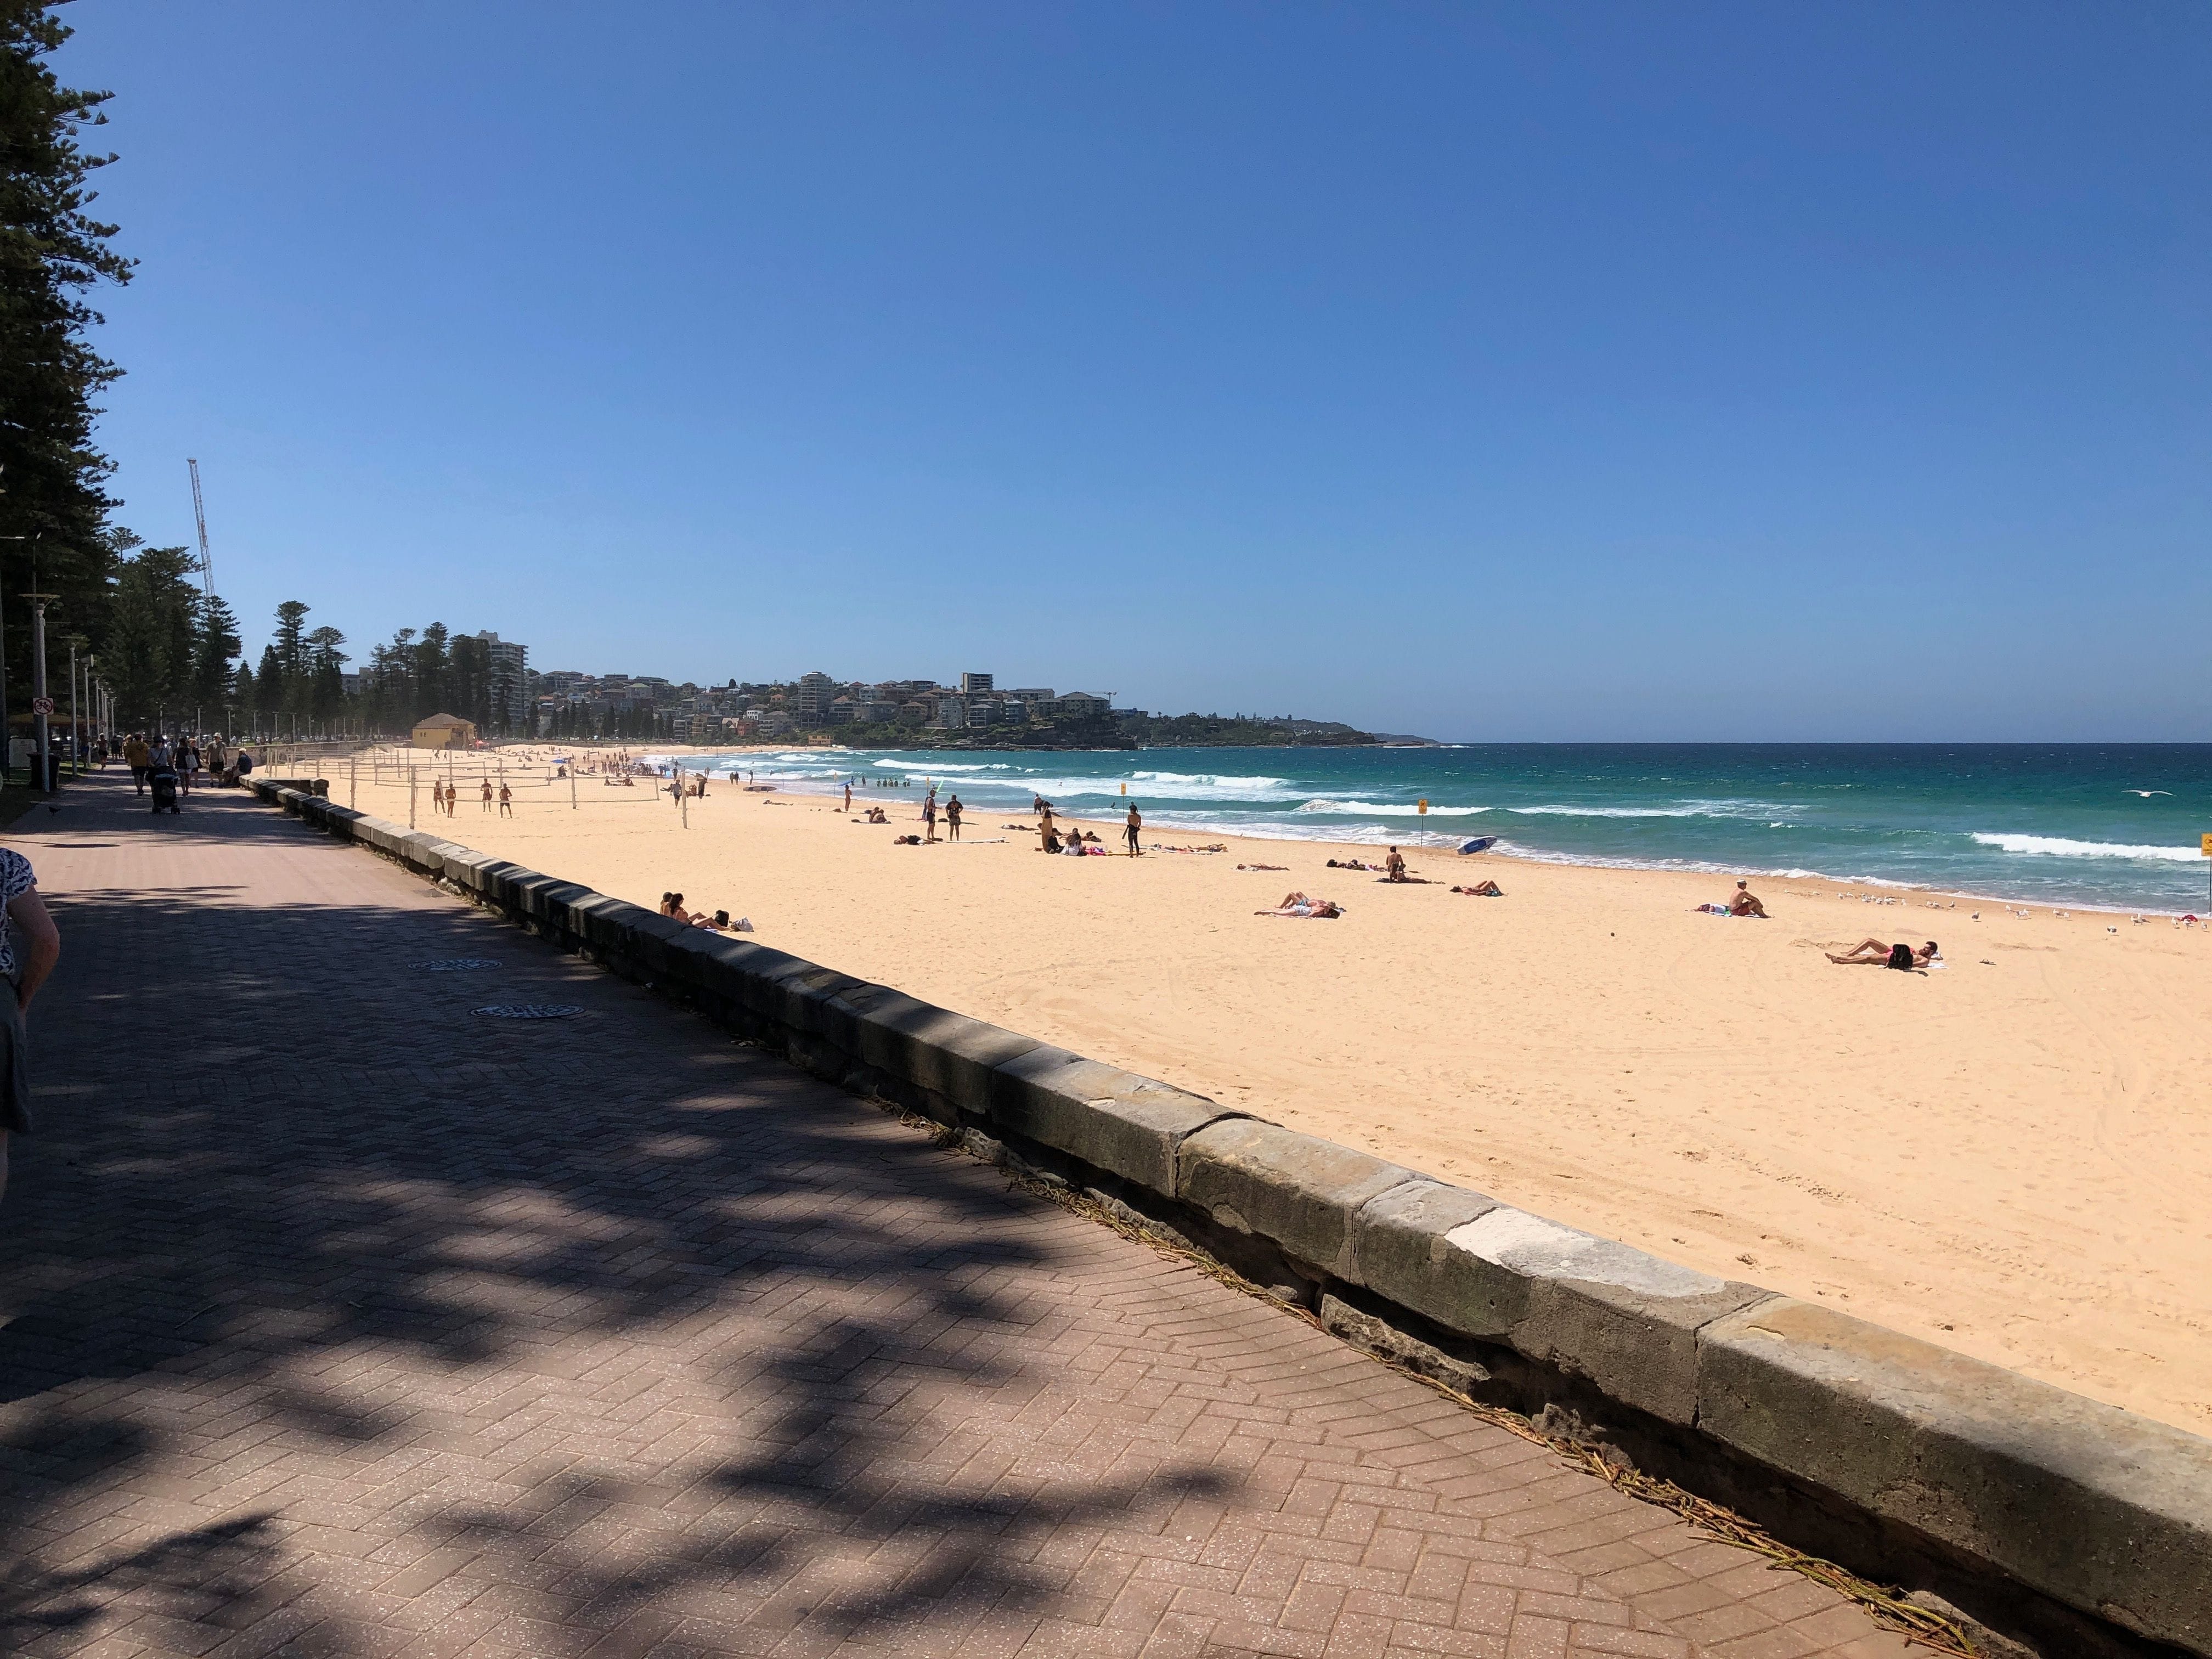 Northern Beaches Public Day Tour febuary 2019 Image -5c649635ee59b